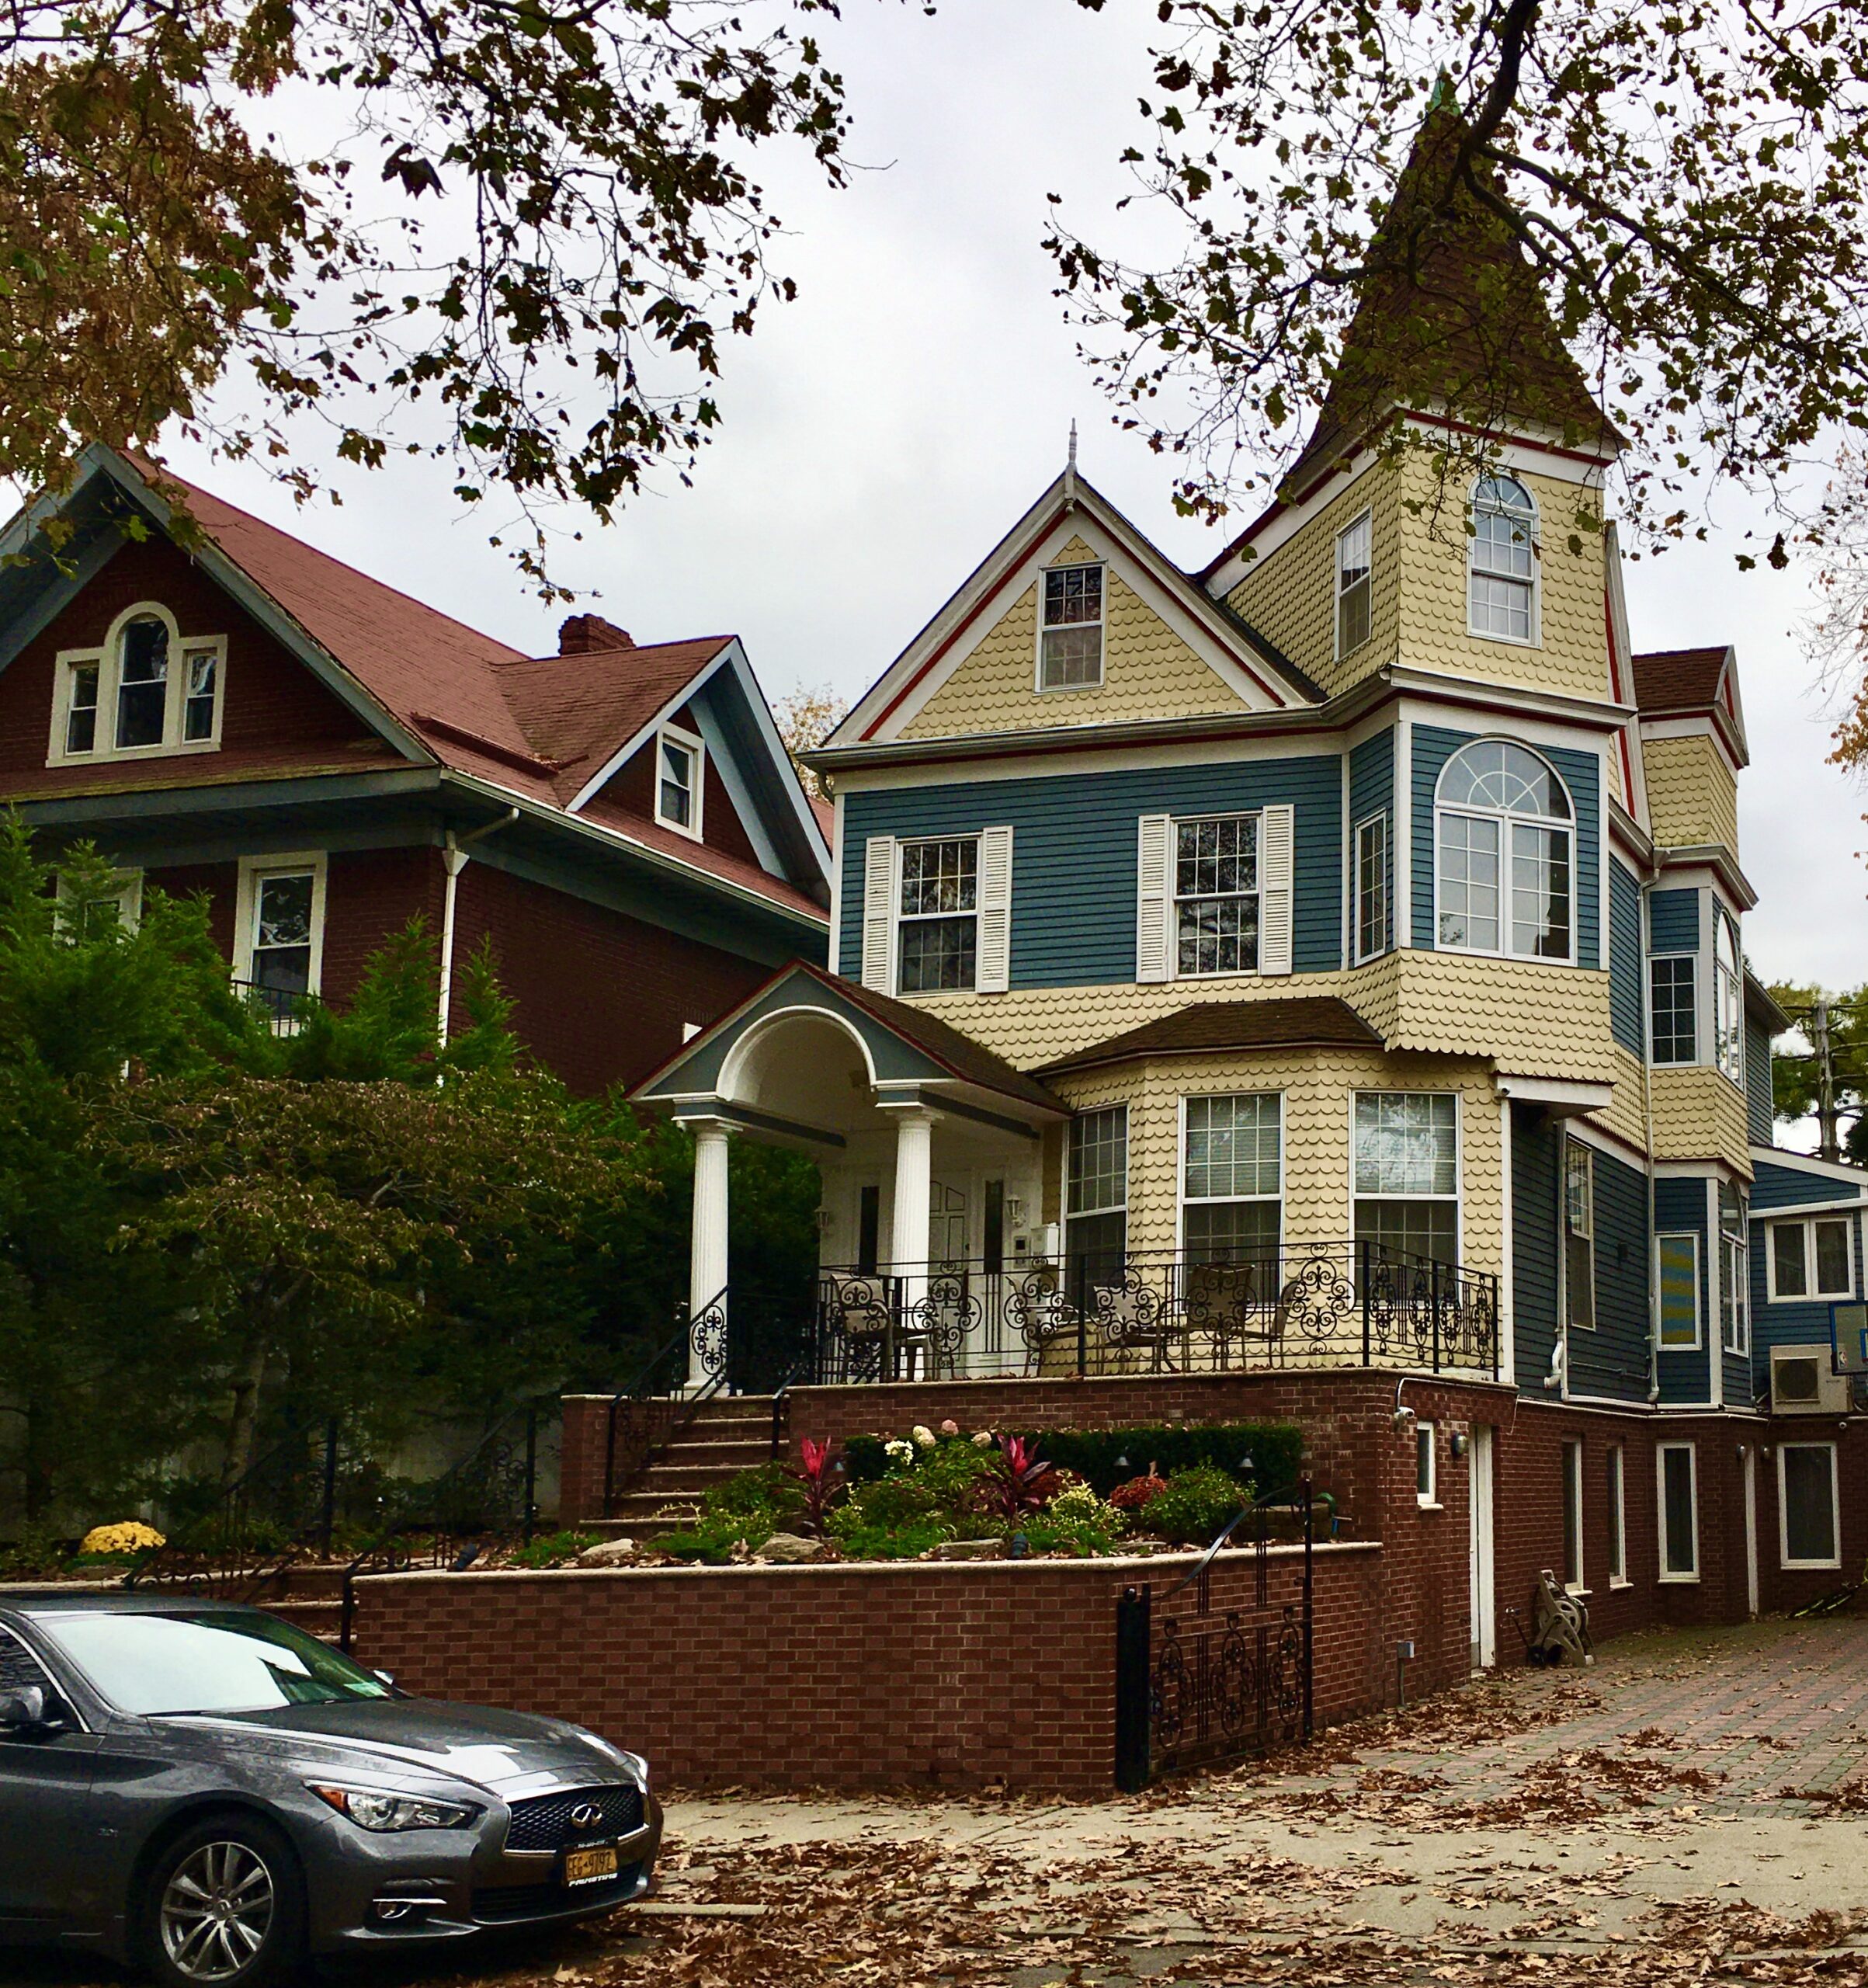 After you get to the end of Colonial Road, turn left onto 92nd Street and you’ll pass this Victorian house at 136 92nd St. Eagle photo by Lore Croghan